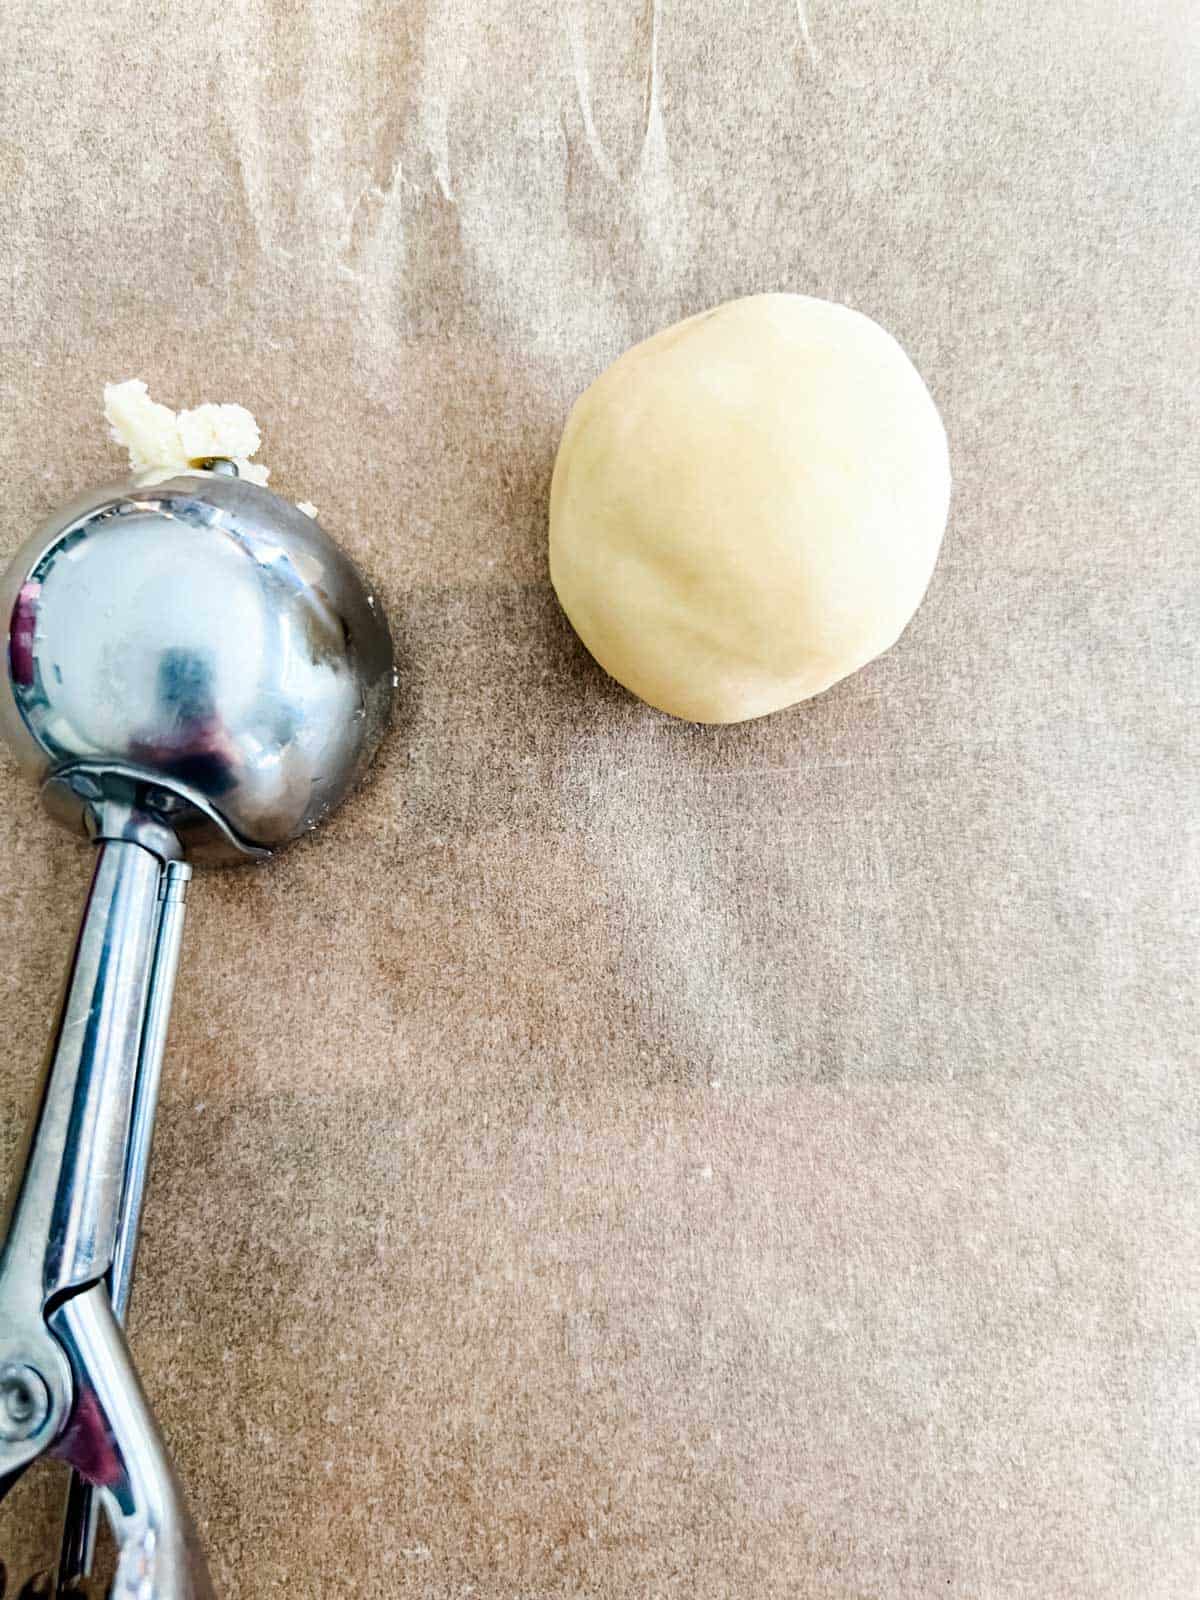 Photo of a cookie scoop and ball of cookie dough.